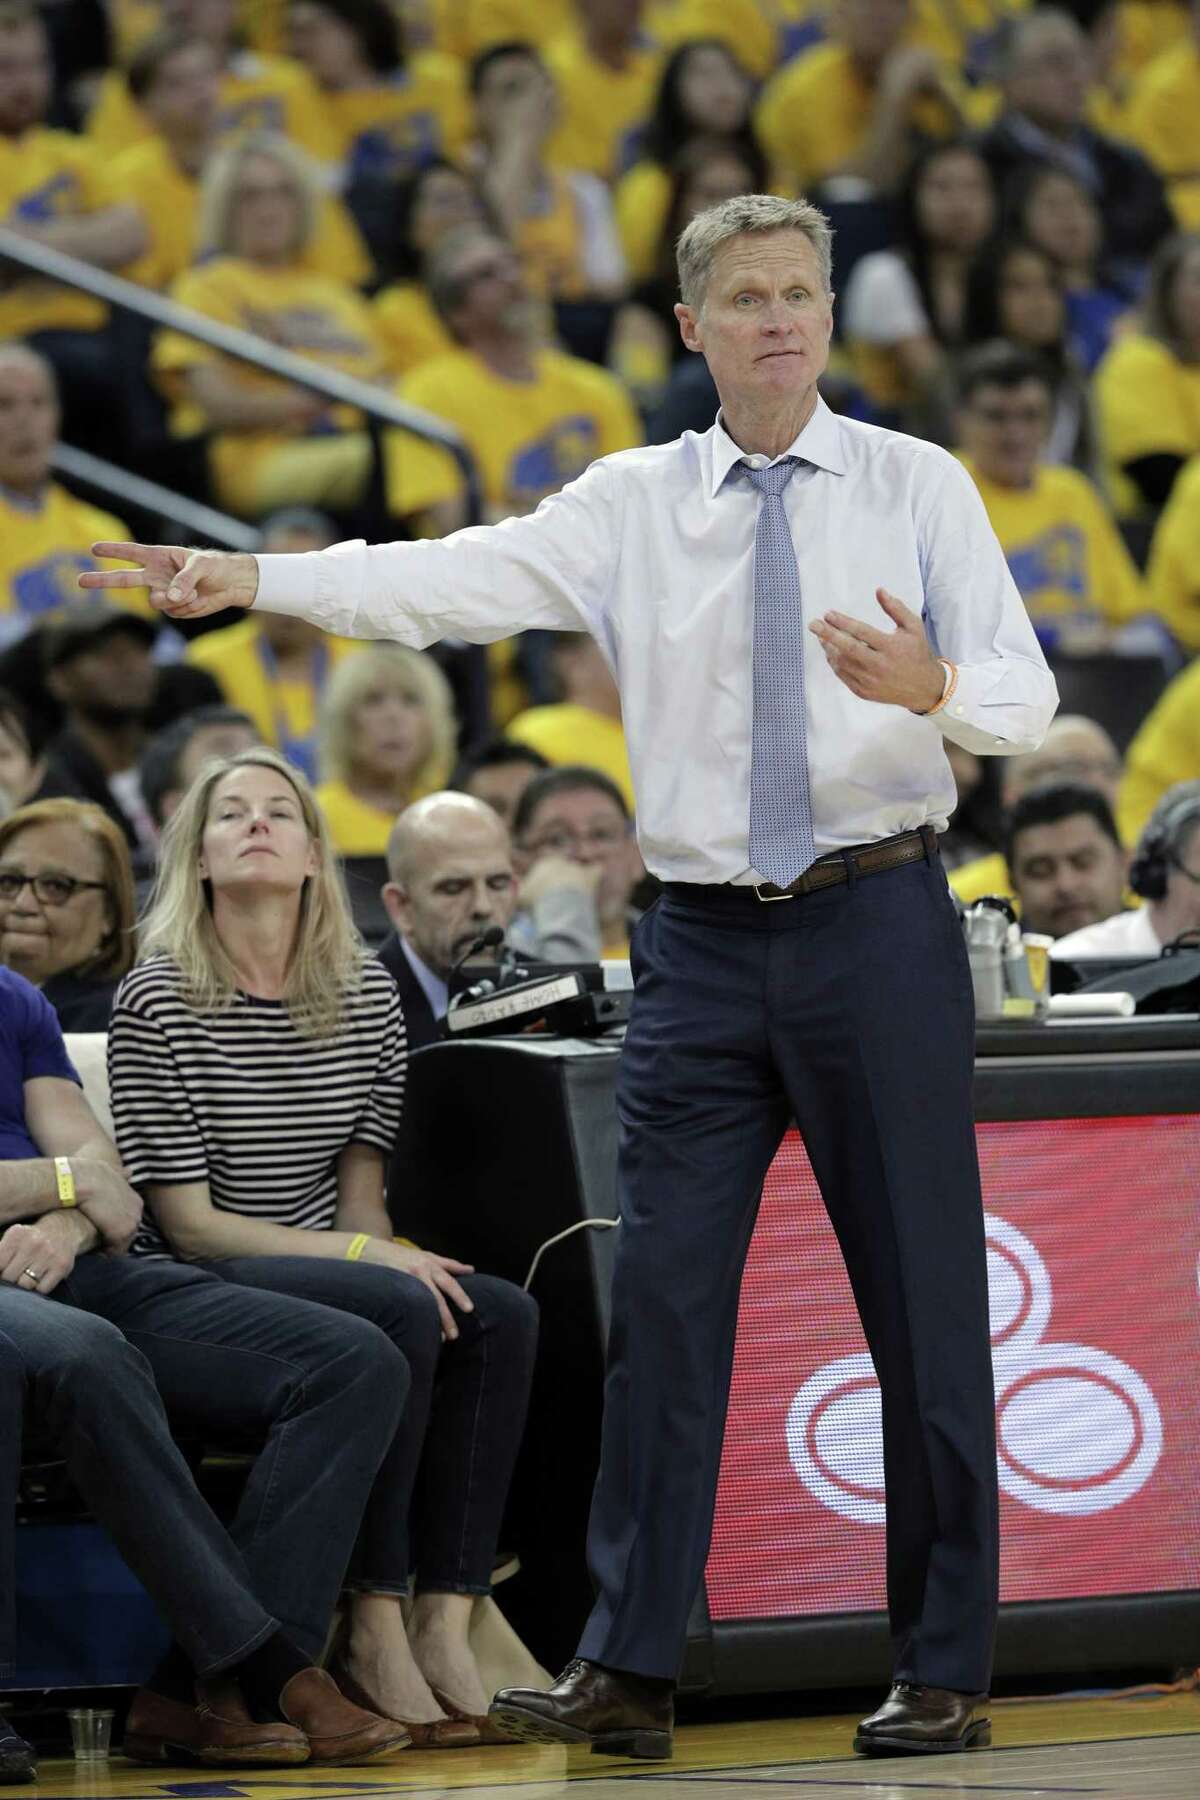 Steve Kerr off the bench calling out plays during the second half as the Golden State Warriors played against the Portland Trail Blazers in Game 2 of the first round of the NBA Playoffs at Oracle Arena in Oakland, Calif., on Wednesday, April 19, 2017.